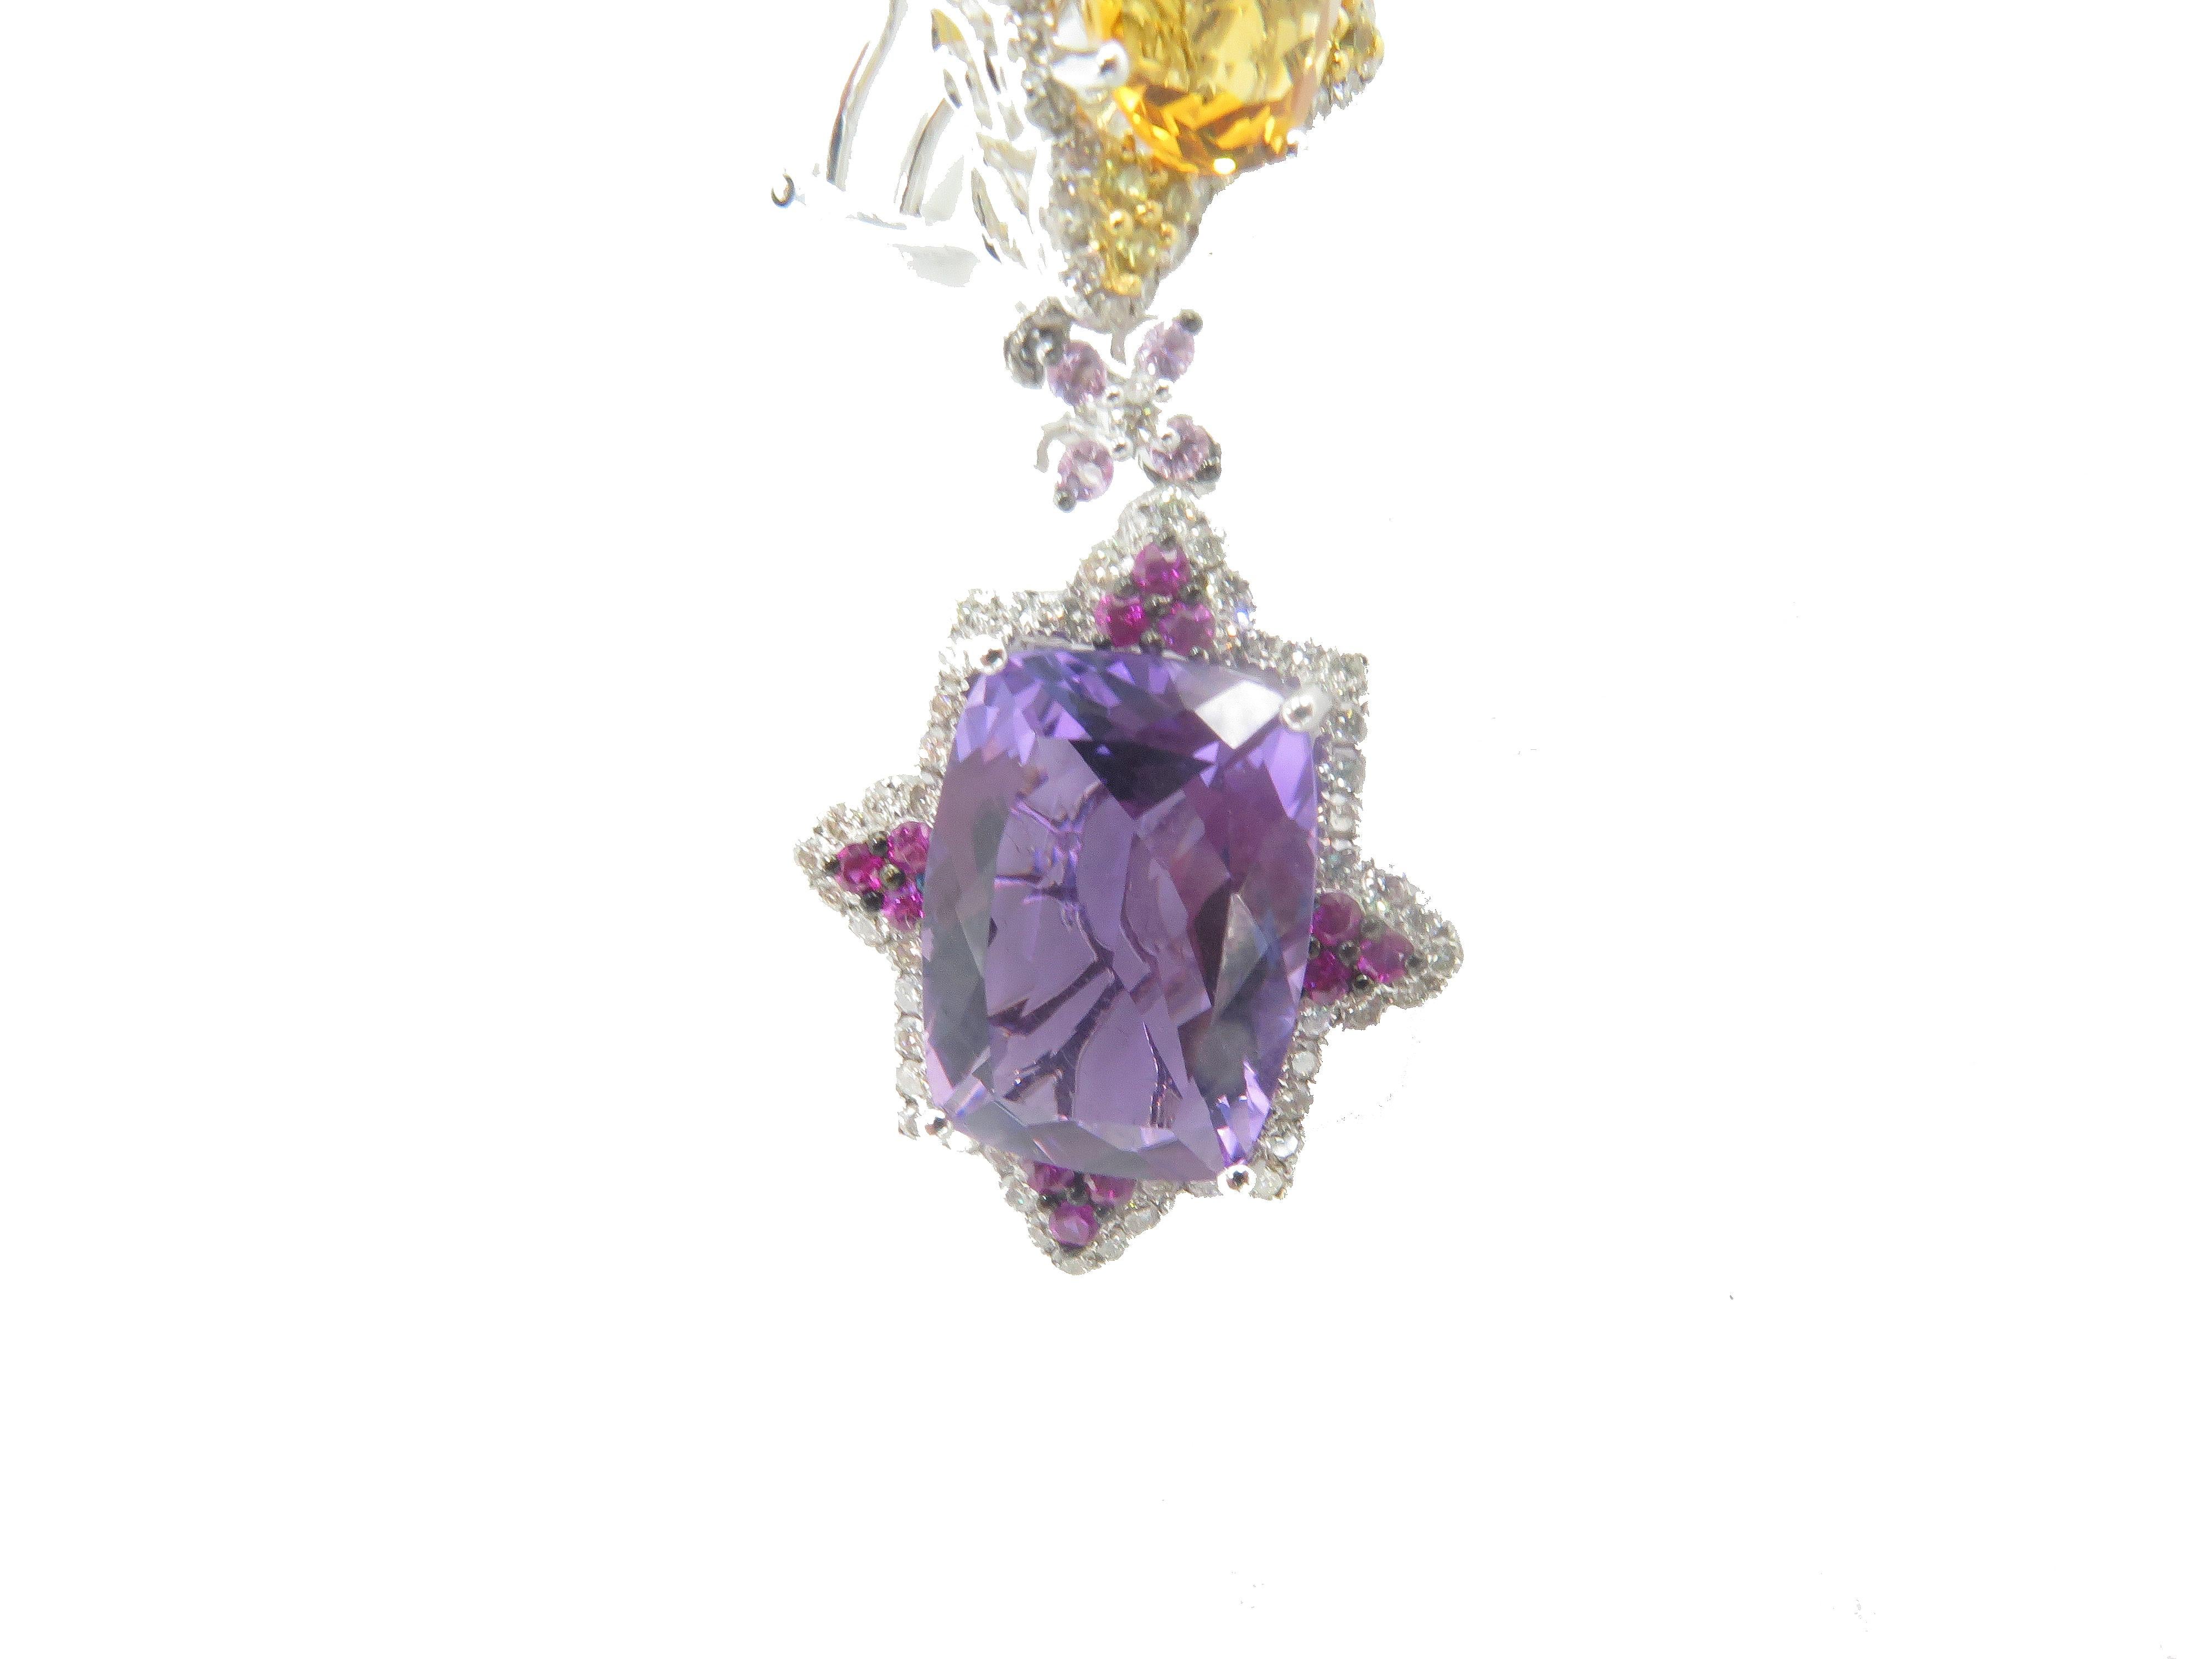 18 Karat White Gold Citrine and Amethyst Dangle Earrings In Excellent Condition For Sale In West Palm Beach, FL